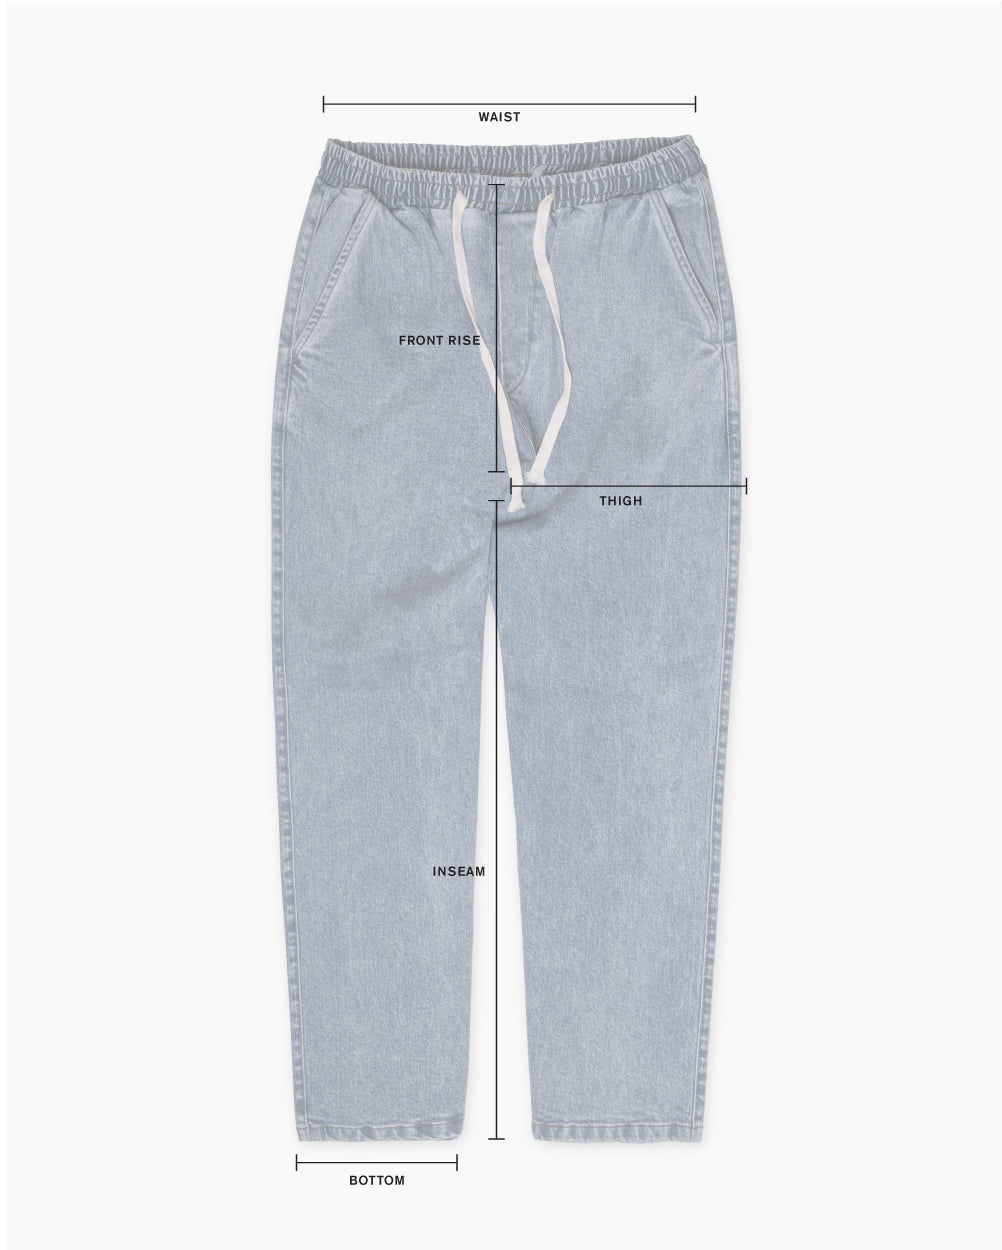 K-SLIM TROUSERS SIZE GUIDE